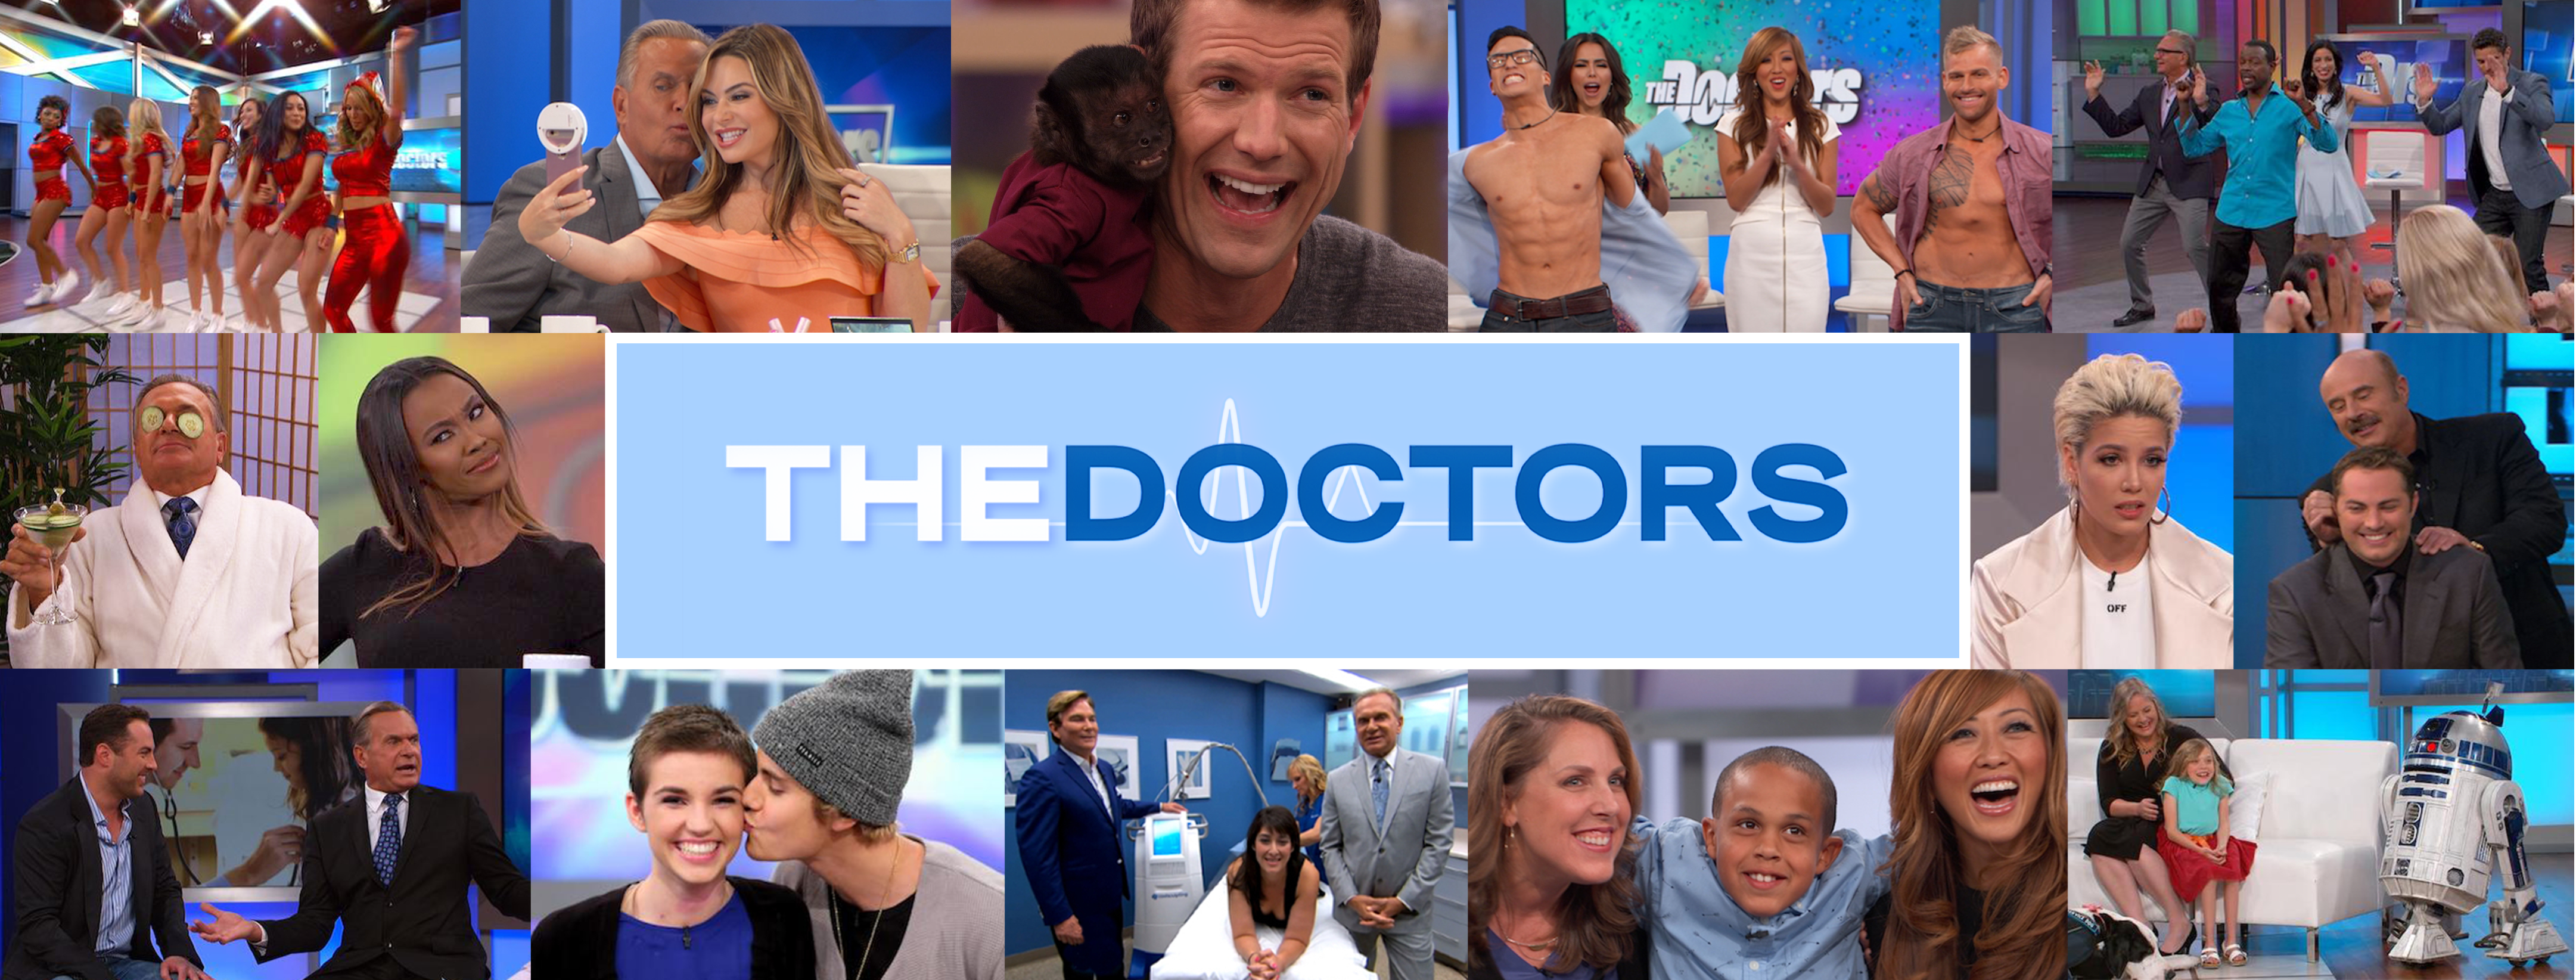 Aaron Carter Leaves Rehab Early | The Doctors TV Show